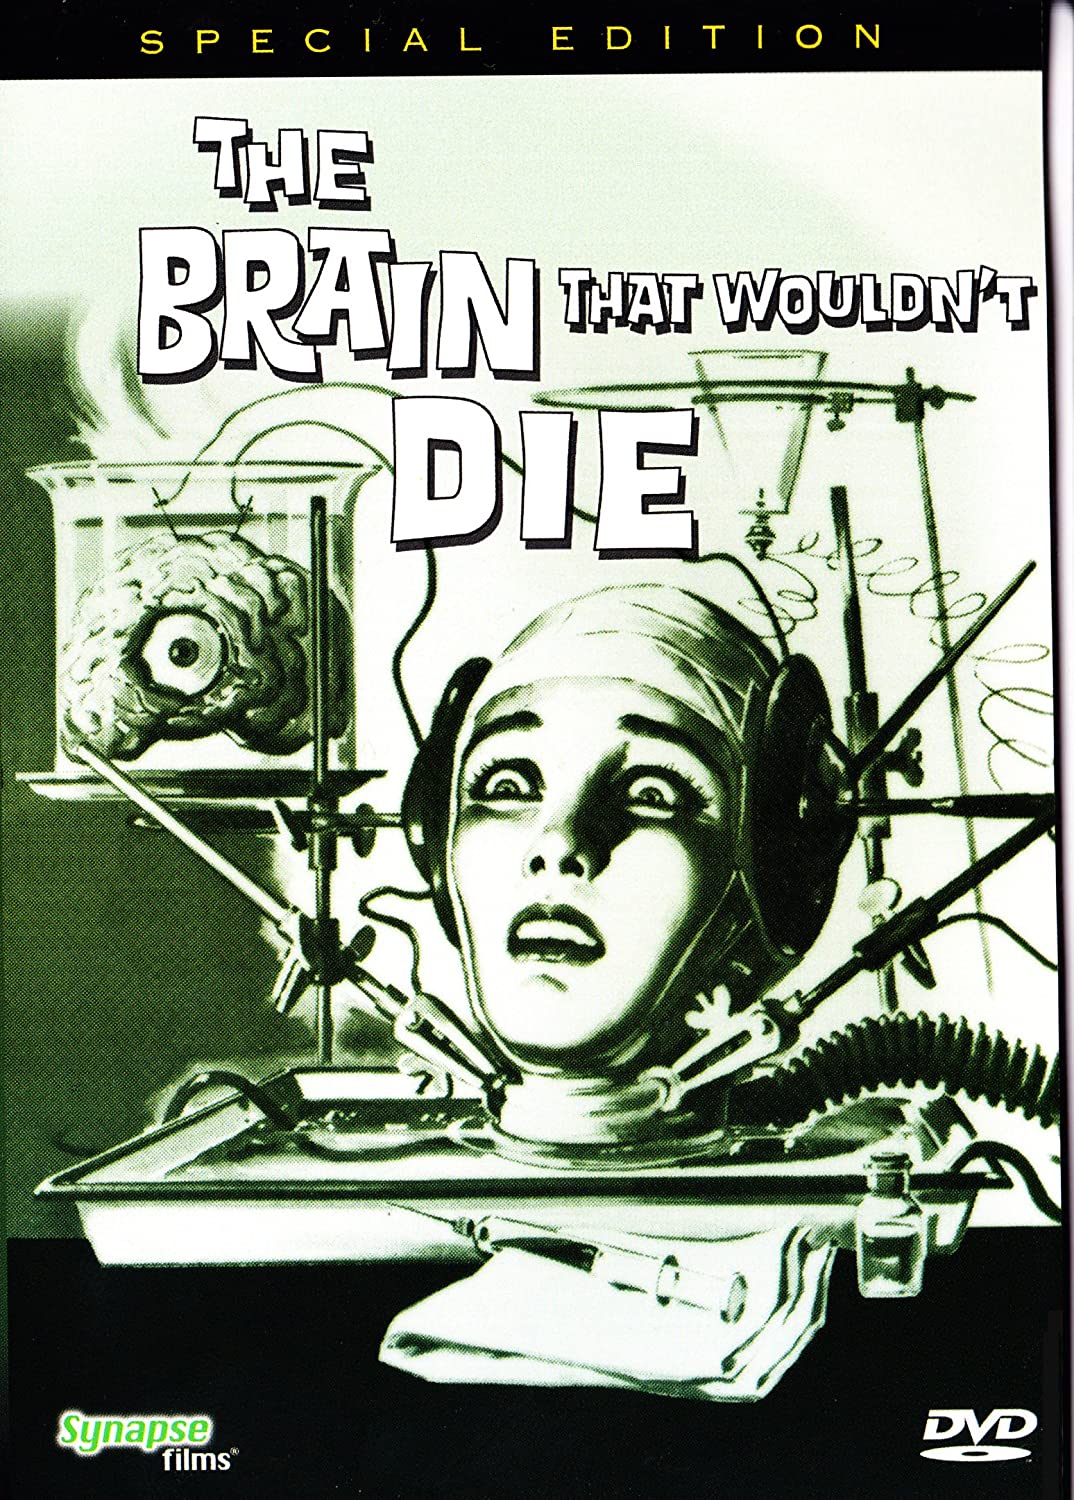 The Brain That Wouldn't Die (1962) starring Herb Evers, Virginia Leith